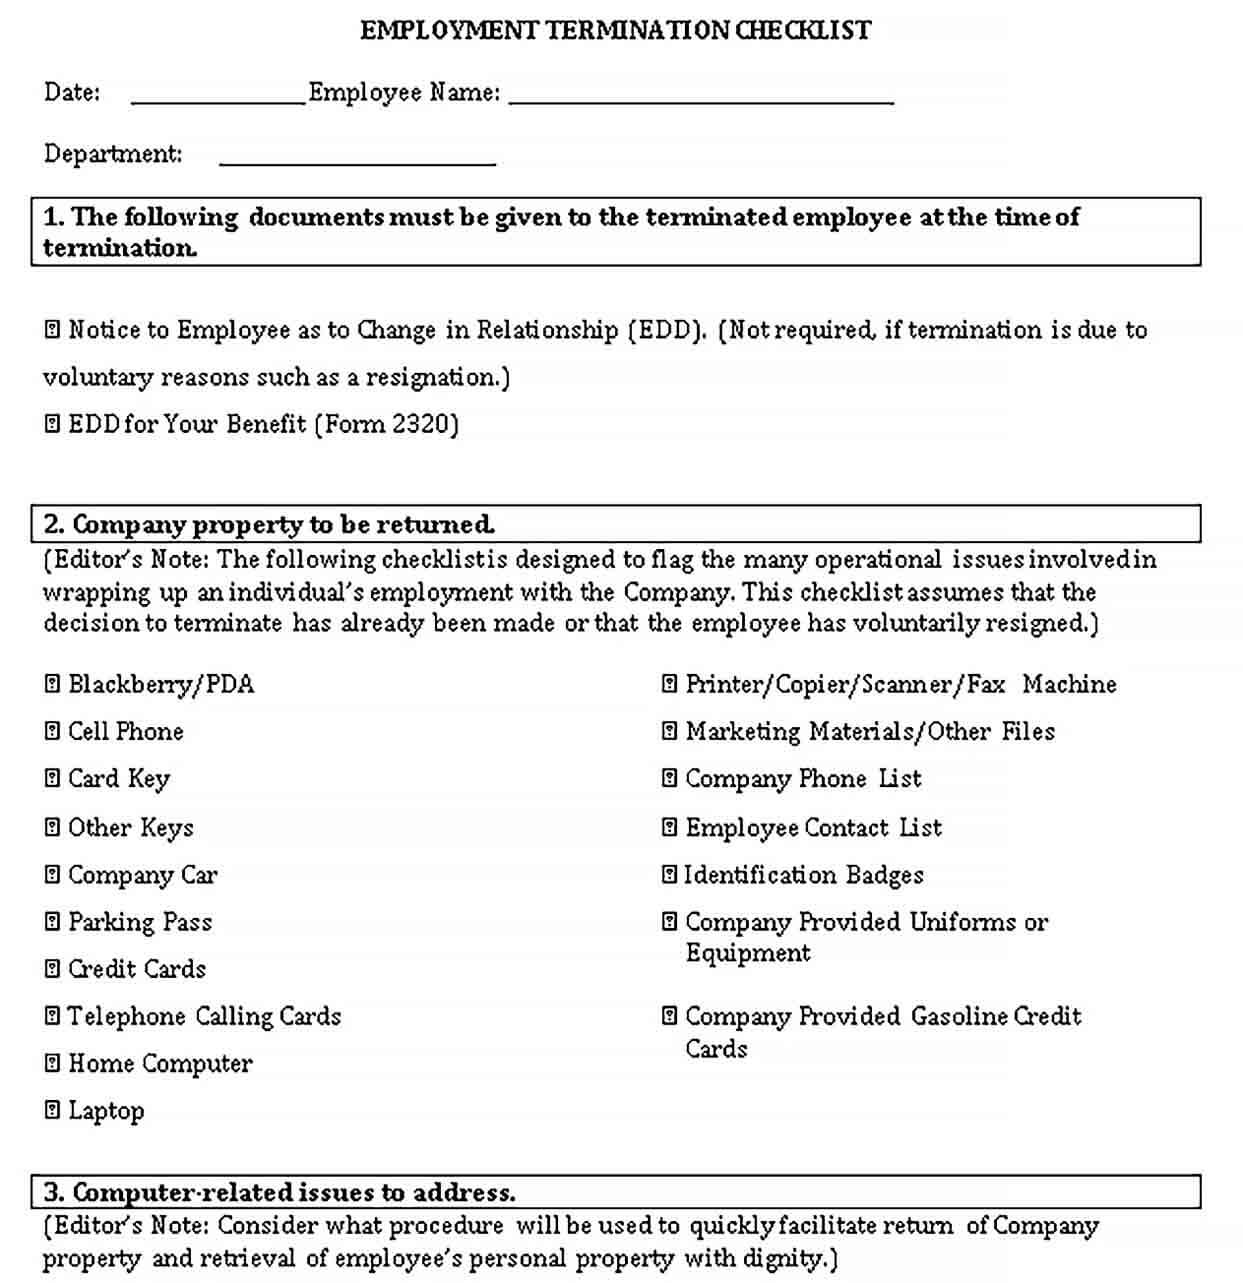 Sample DOC Format of Employment Termination Checklist Template